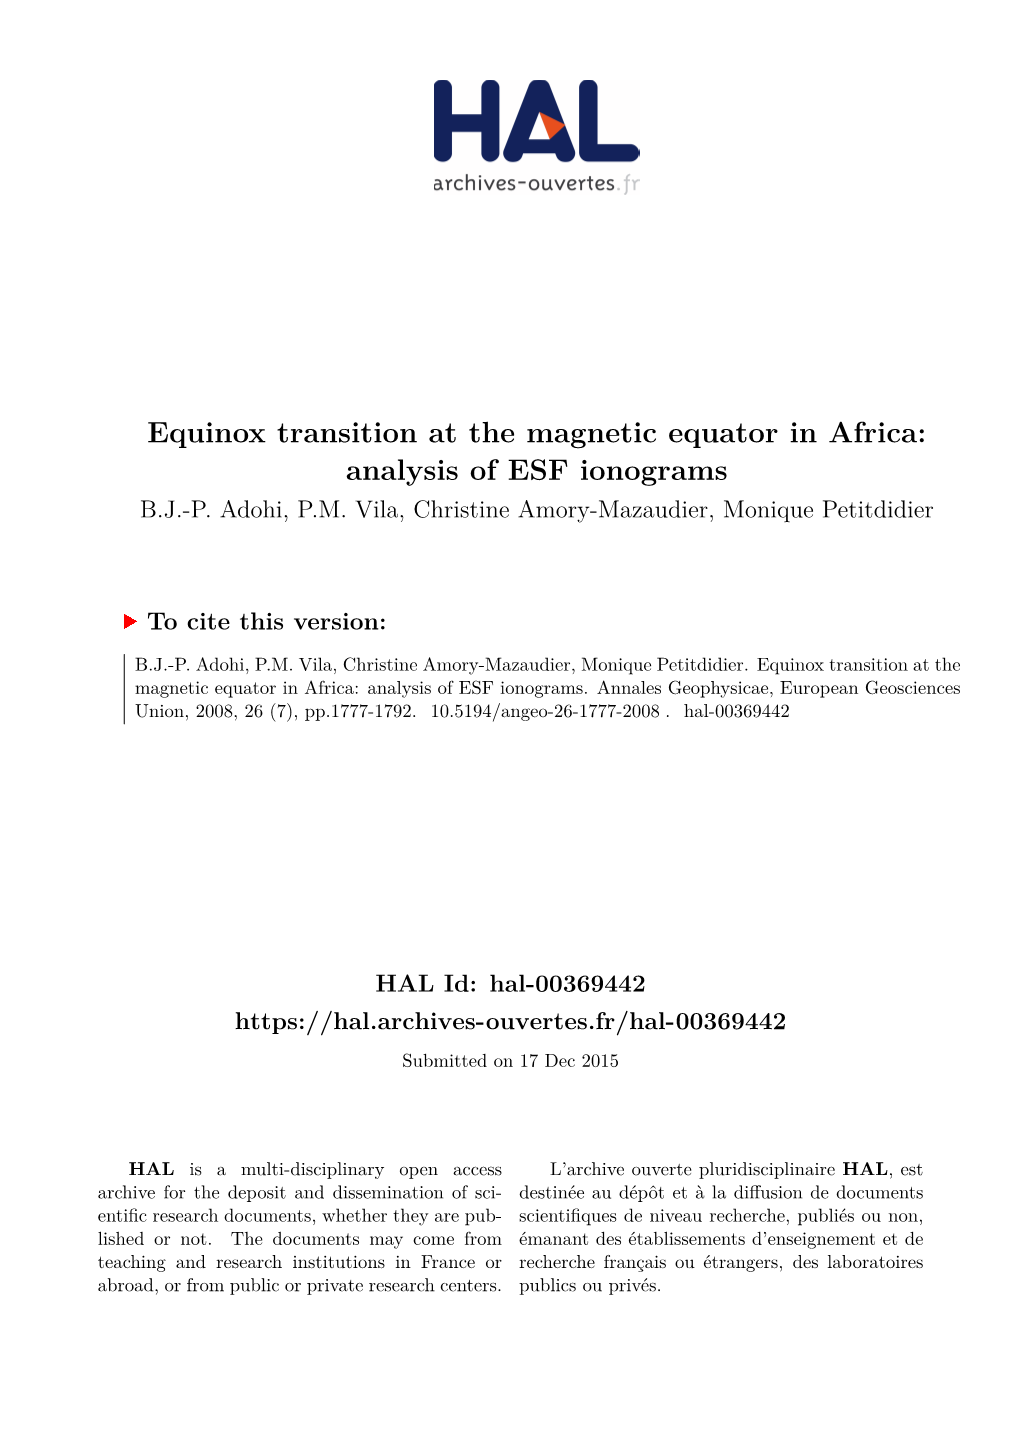 Equinox Transition at the Magnetic Equator in Africa: Analysis of ESF Ionograms B.J.-P